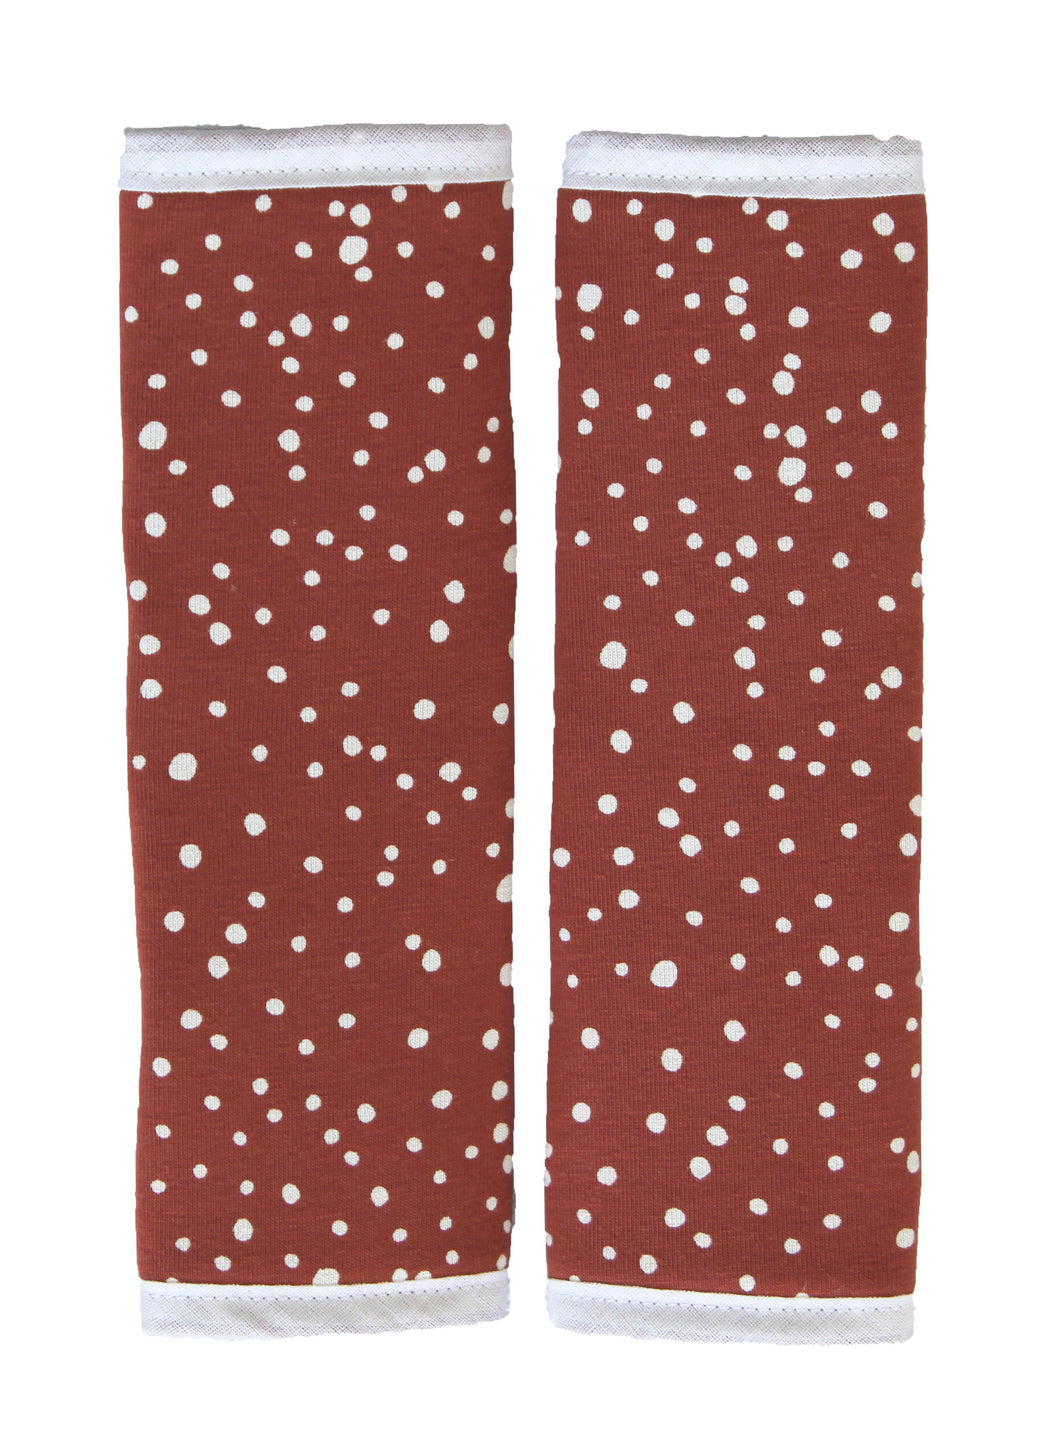 Seat Belt Pads Large Universal - Rust/Red with White Dots